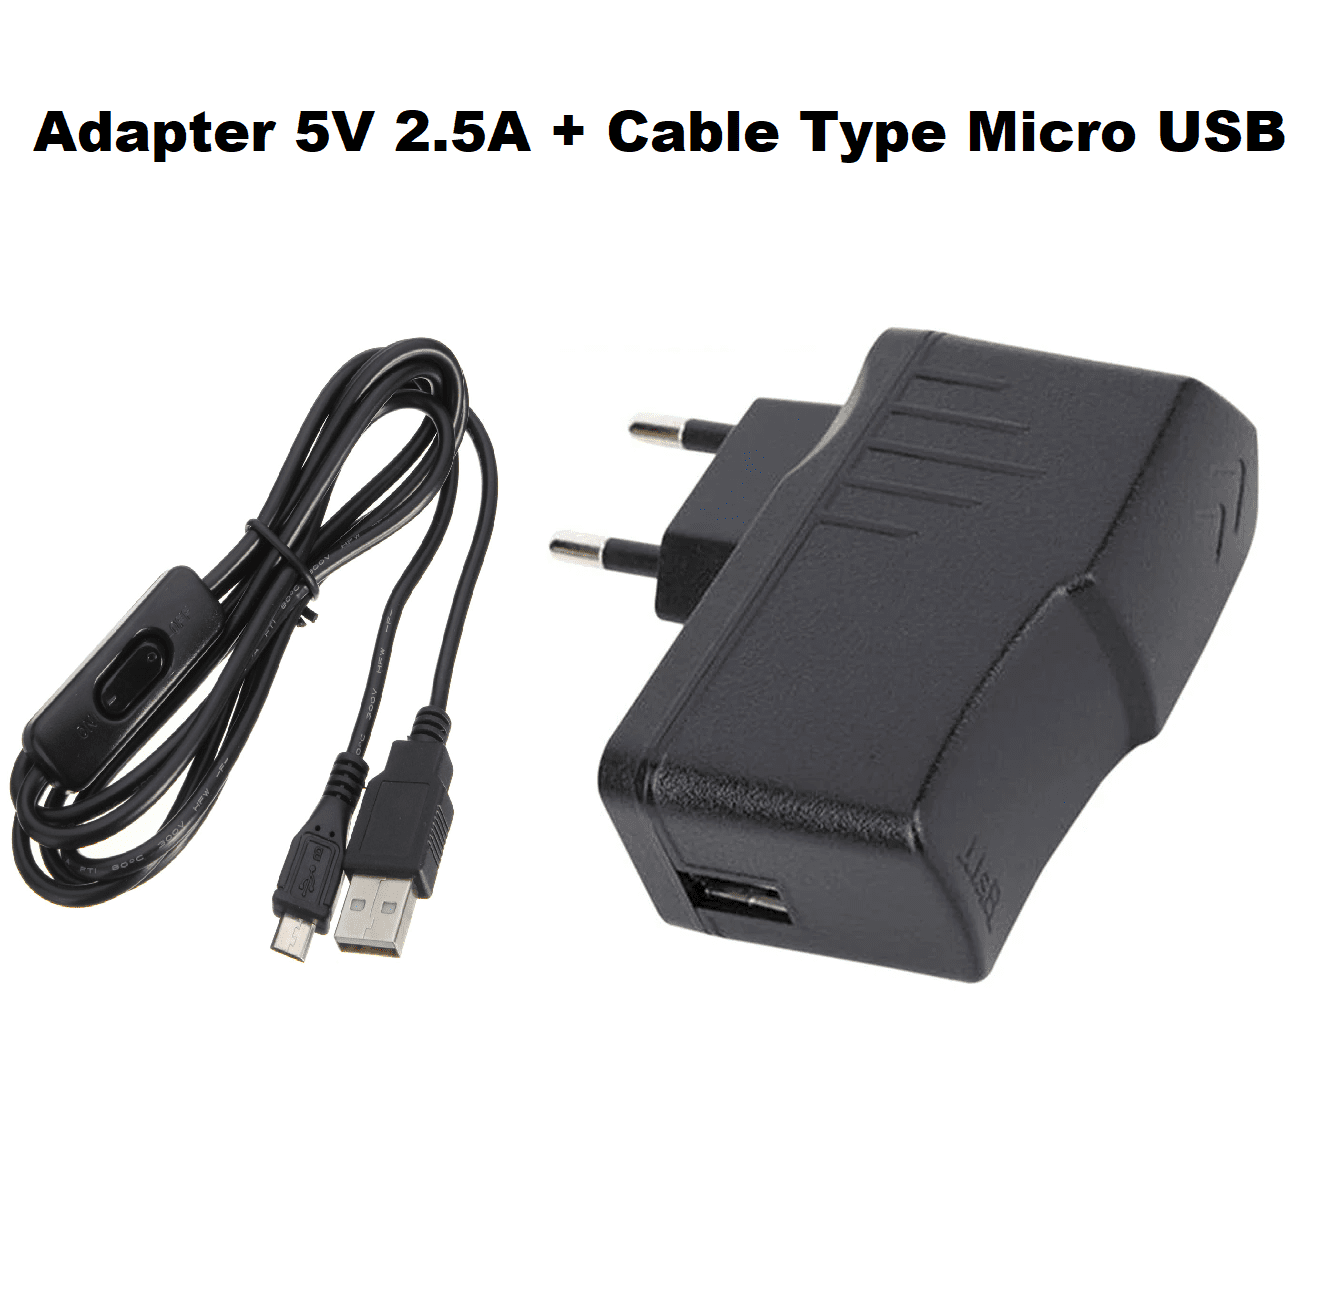 Adaptateur 5V 2.5A + Cable Micro USB avec bouton On/Off DIDACTICO TUNISIE